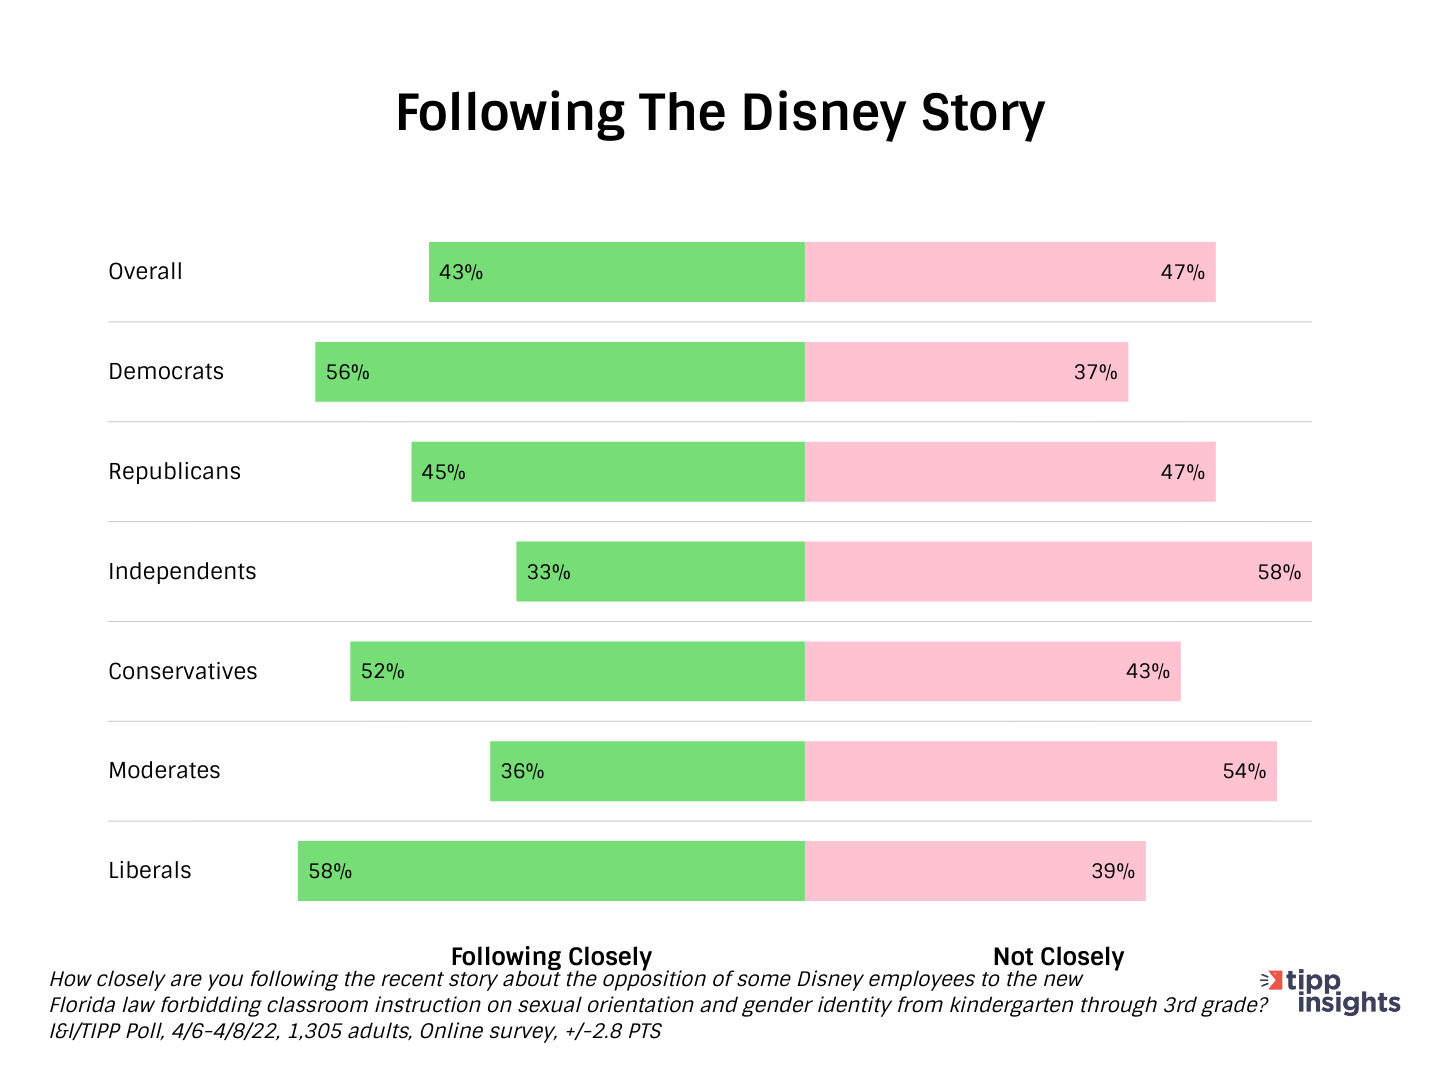 Following the Disney story